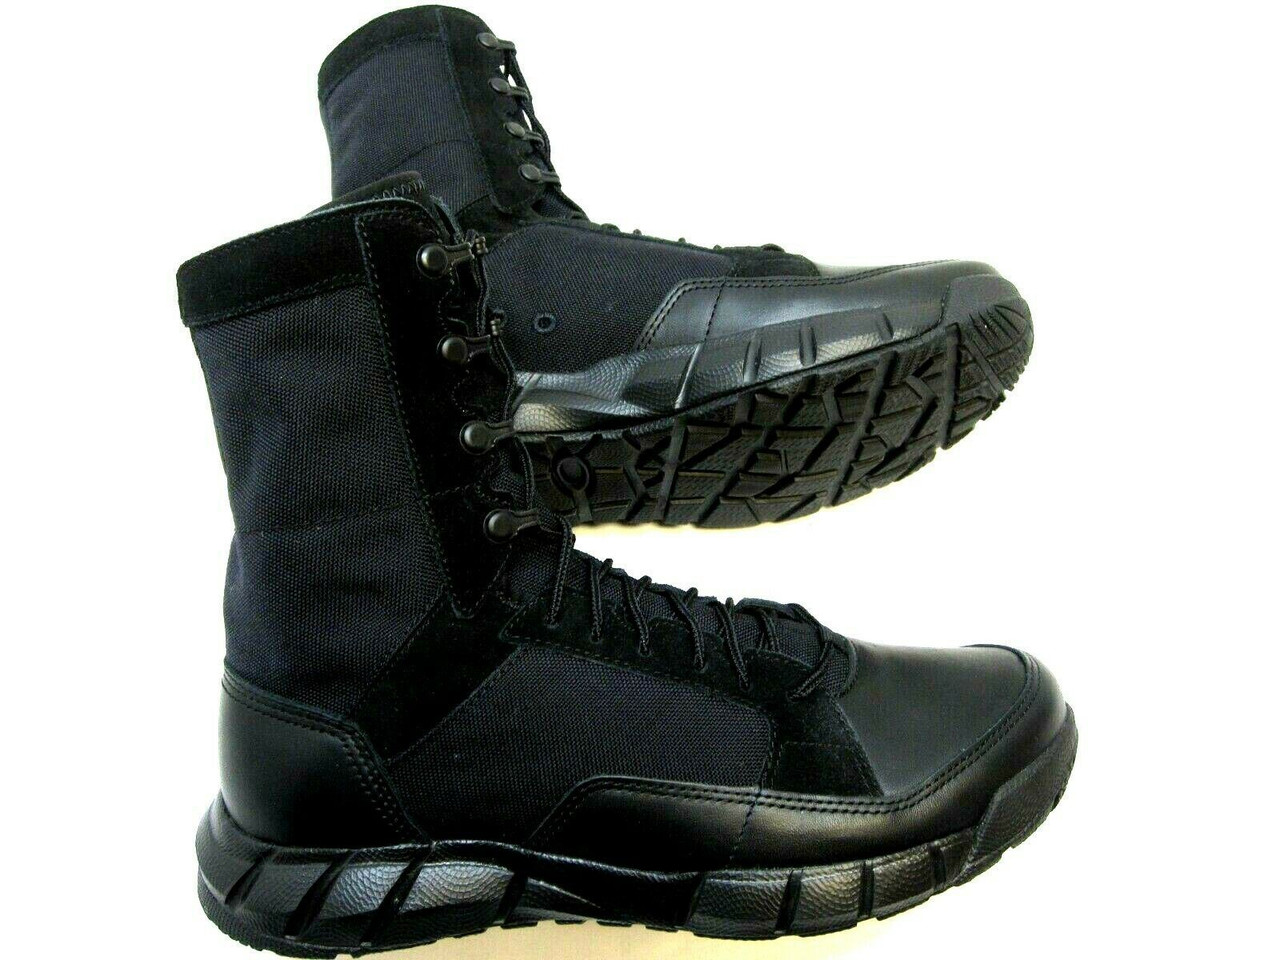 NEW OAKLEY SI LIGHT PATROL BOOT BLACK MILITARY TACTICAL DUTY BOOTS BLACKOUT